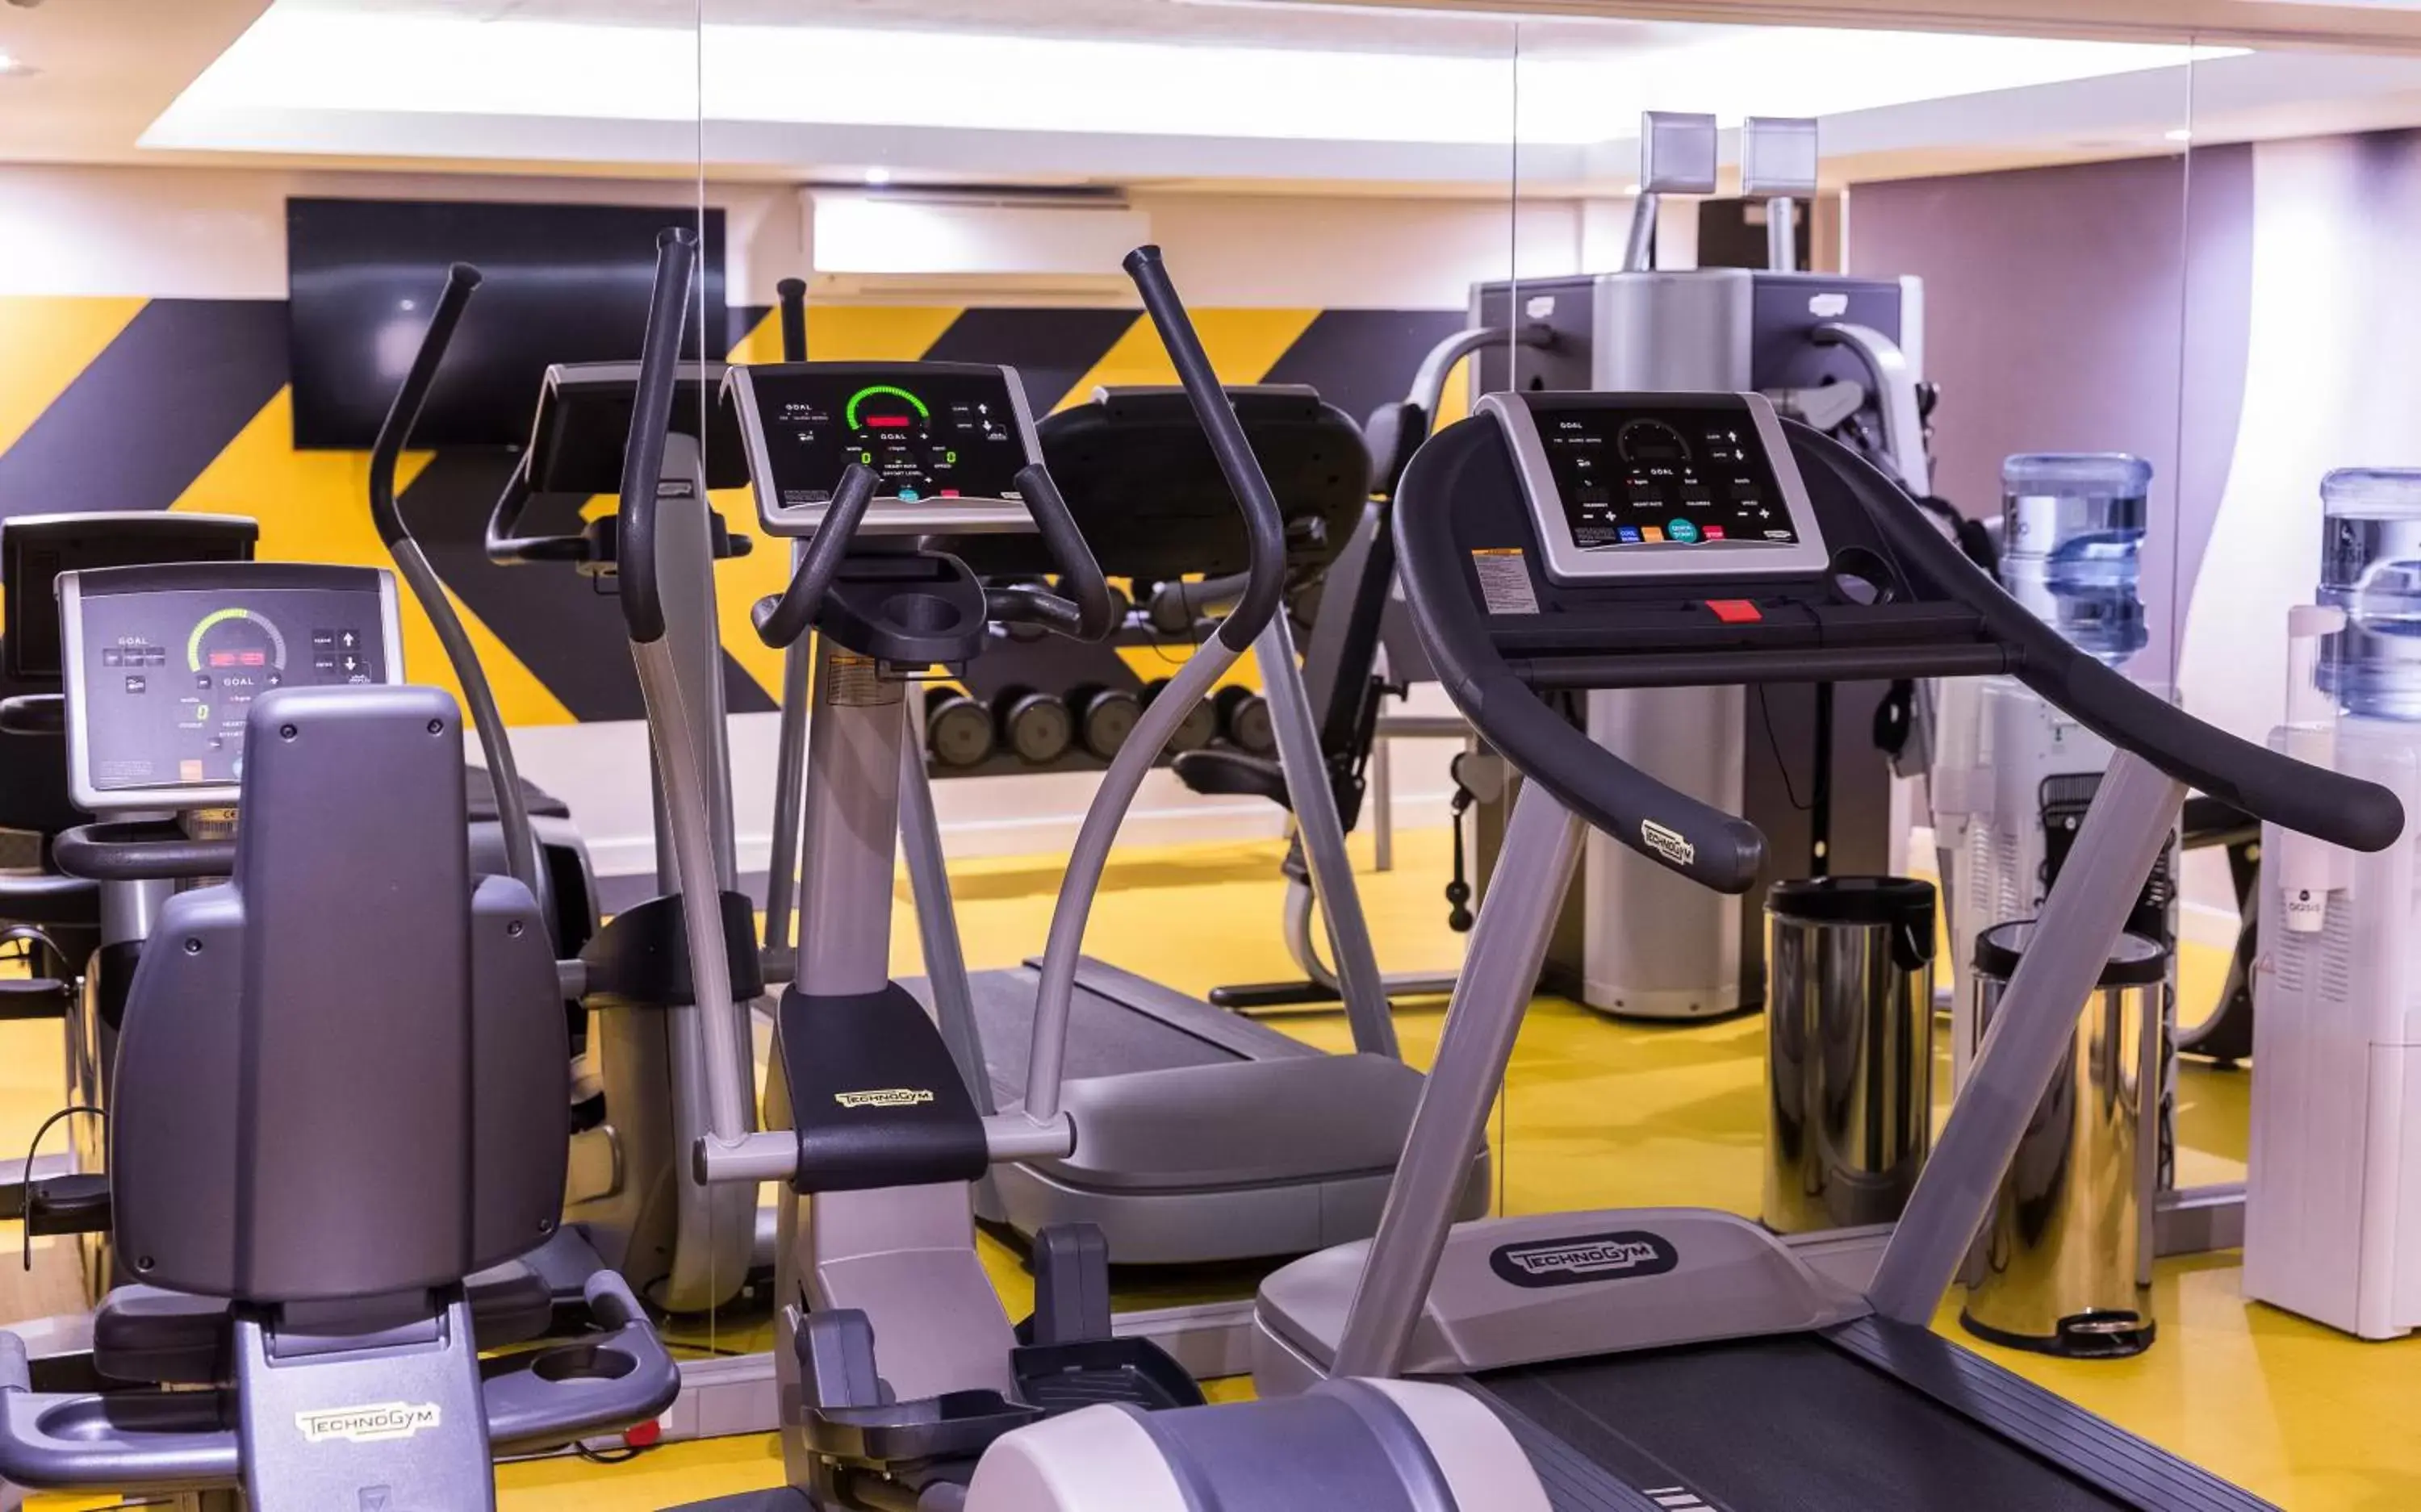 Fitness centre/facilities, Fitness Center/Facilities in The Capital Mirage